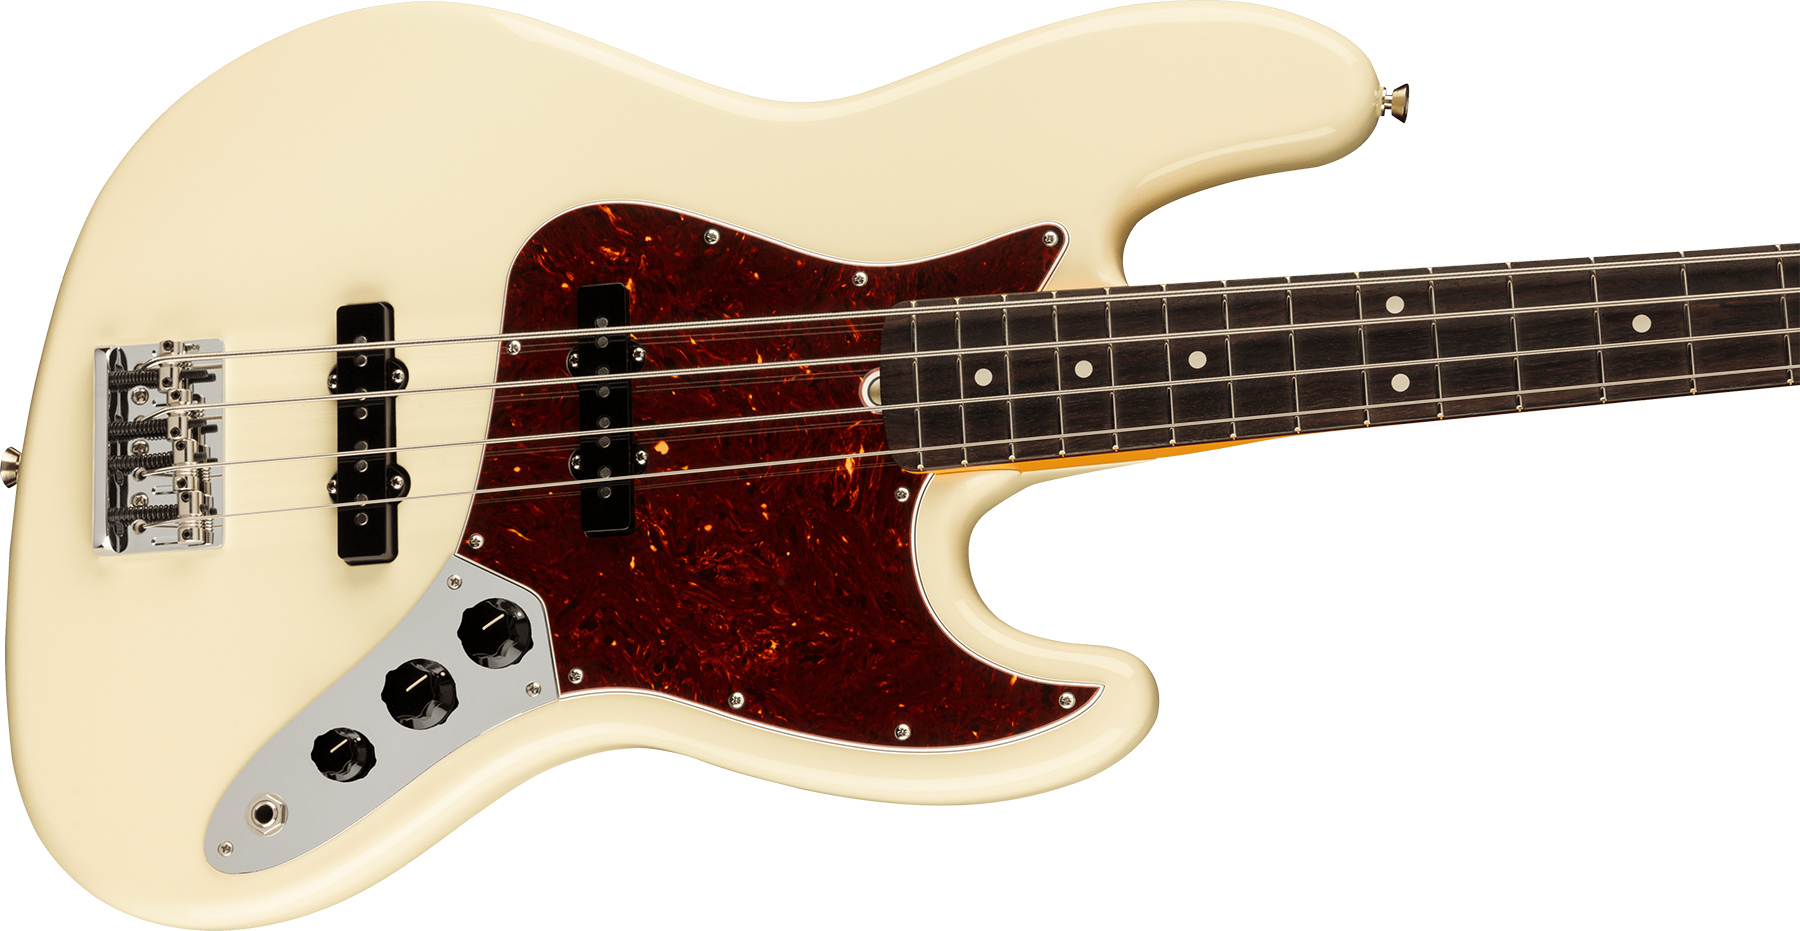 Fender Jazz Bass American Professional Ii Lh Gaucher Usa Rw - Olympic White - Solid body electric bass - Variation 2